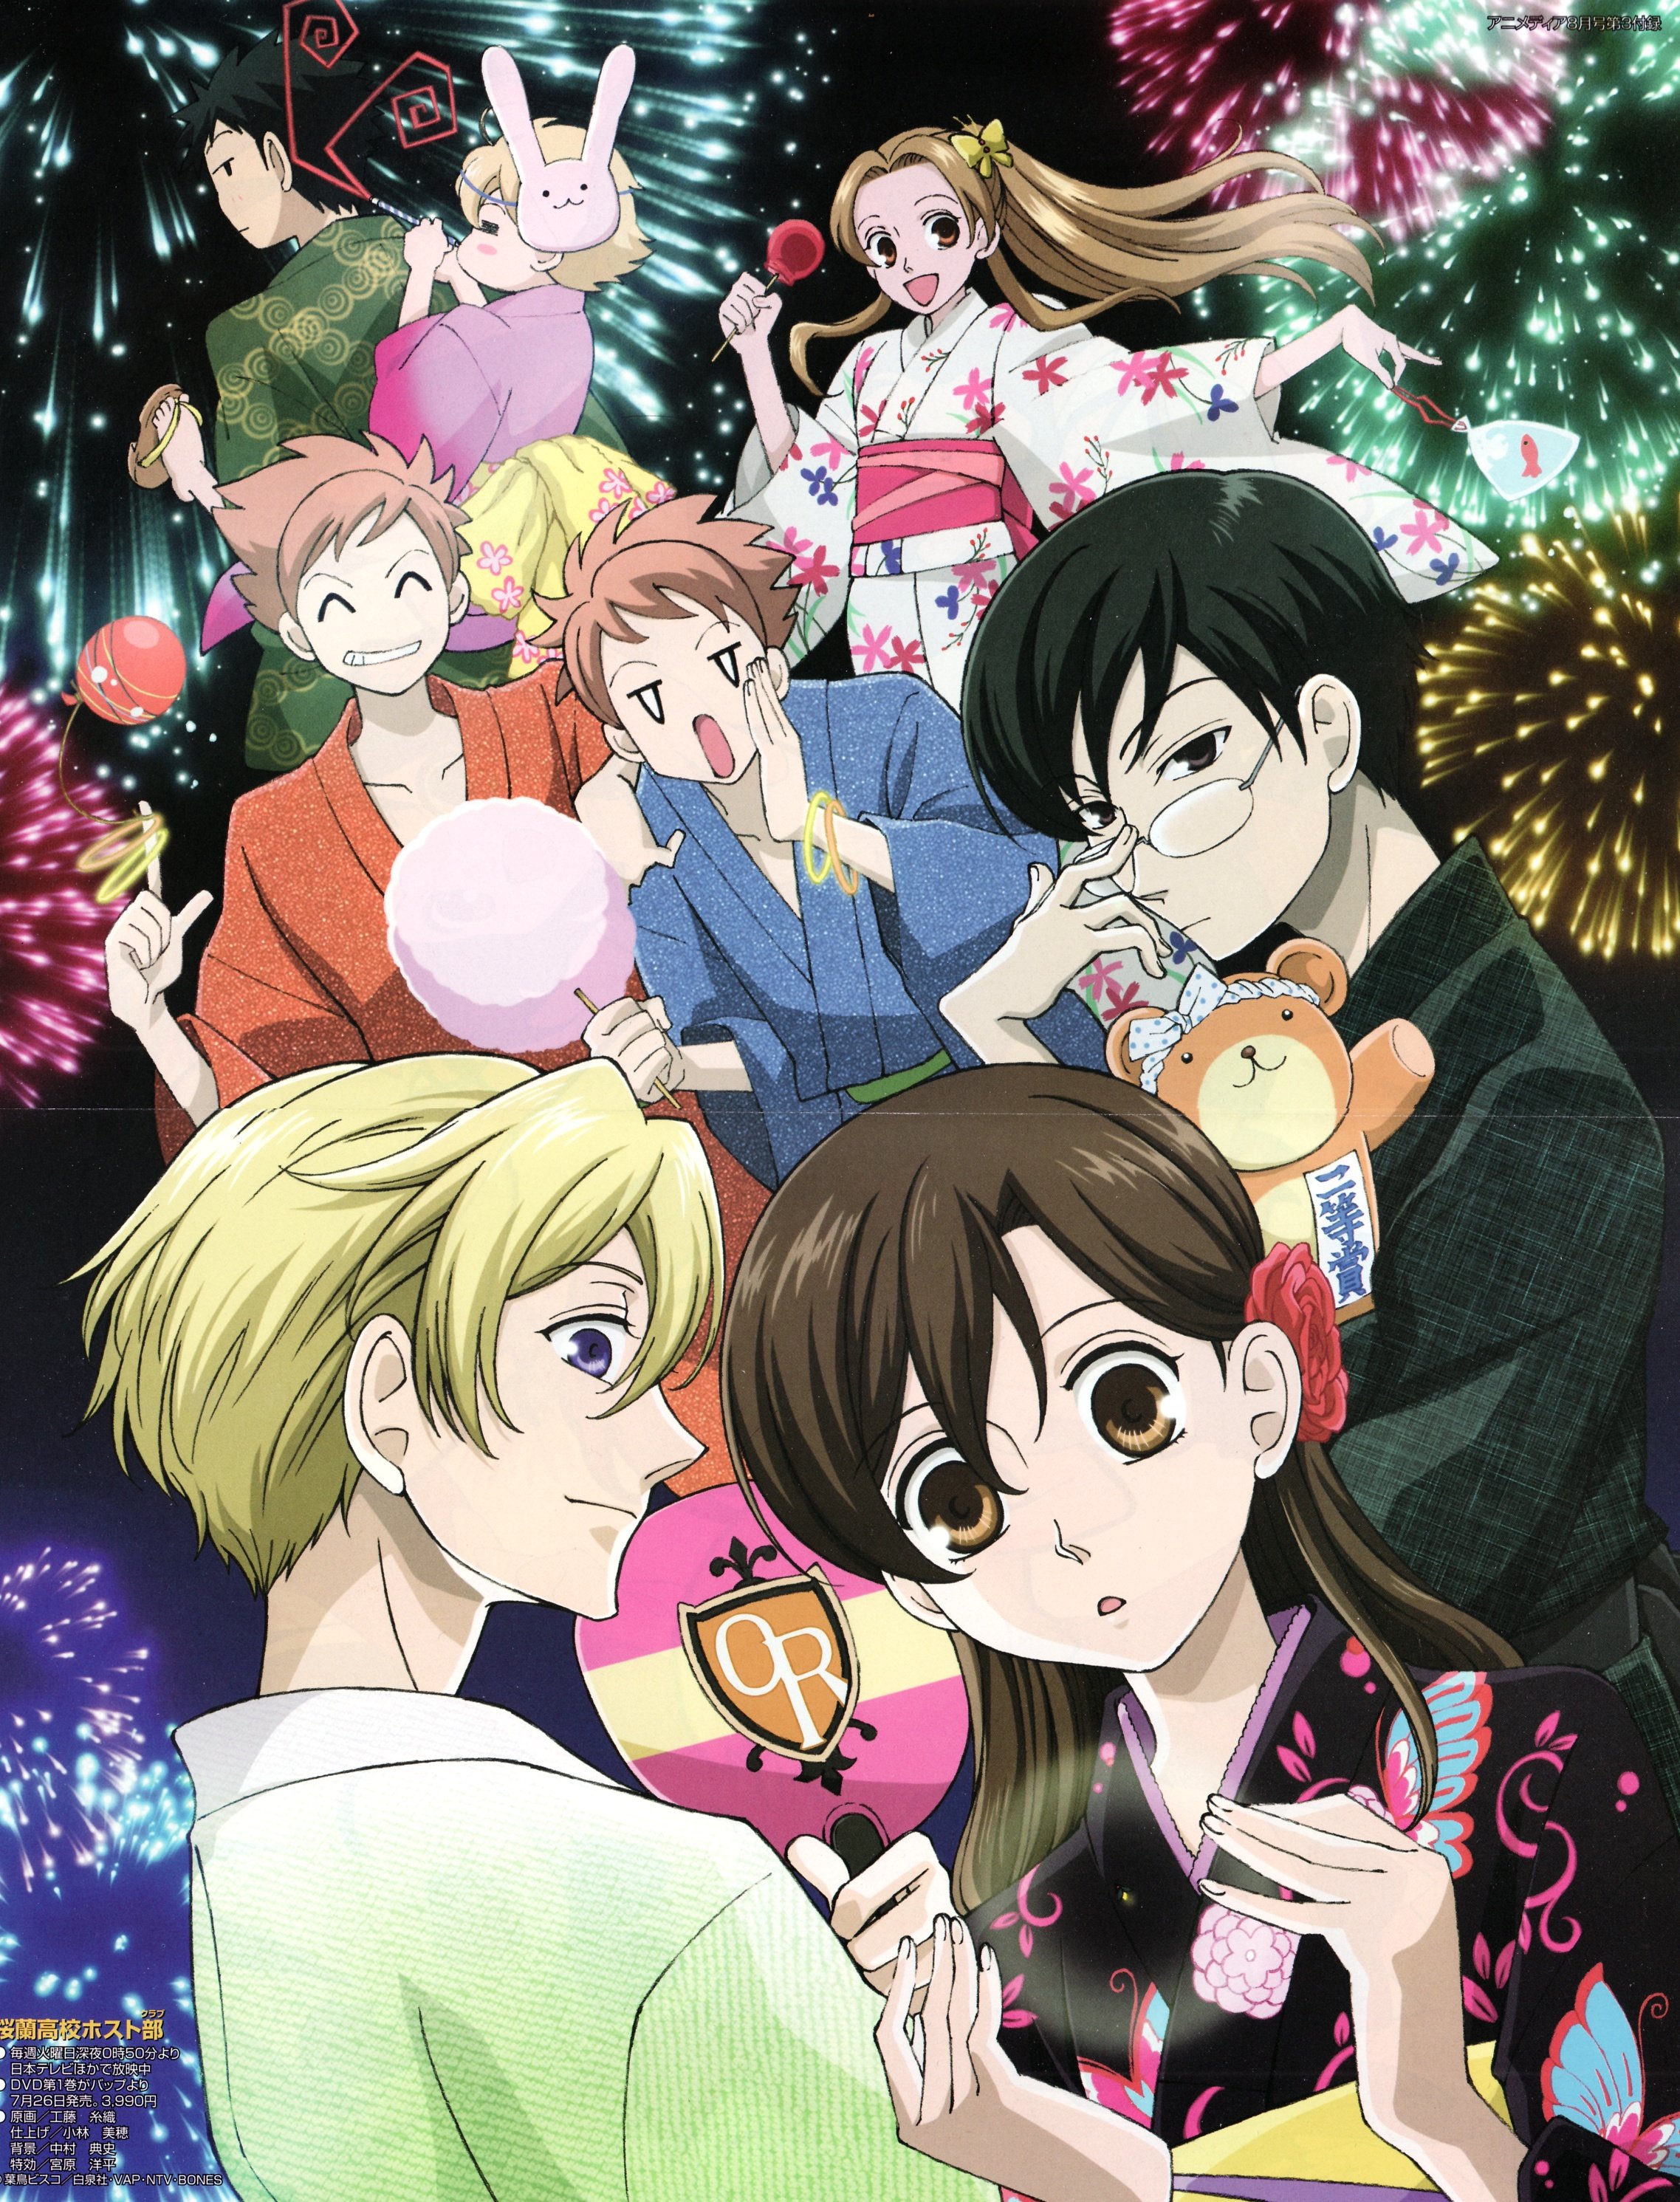 ouran, High, School, Host, Club, Series, Males, Anime, Group, Girl Wallpaper